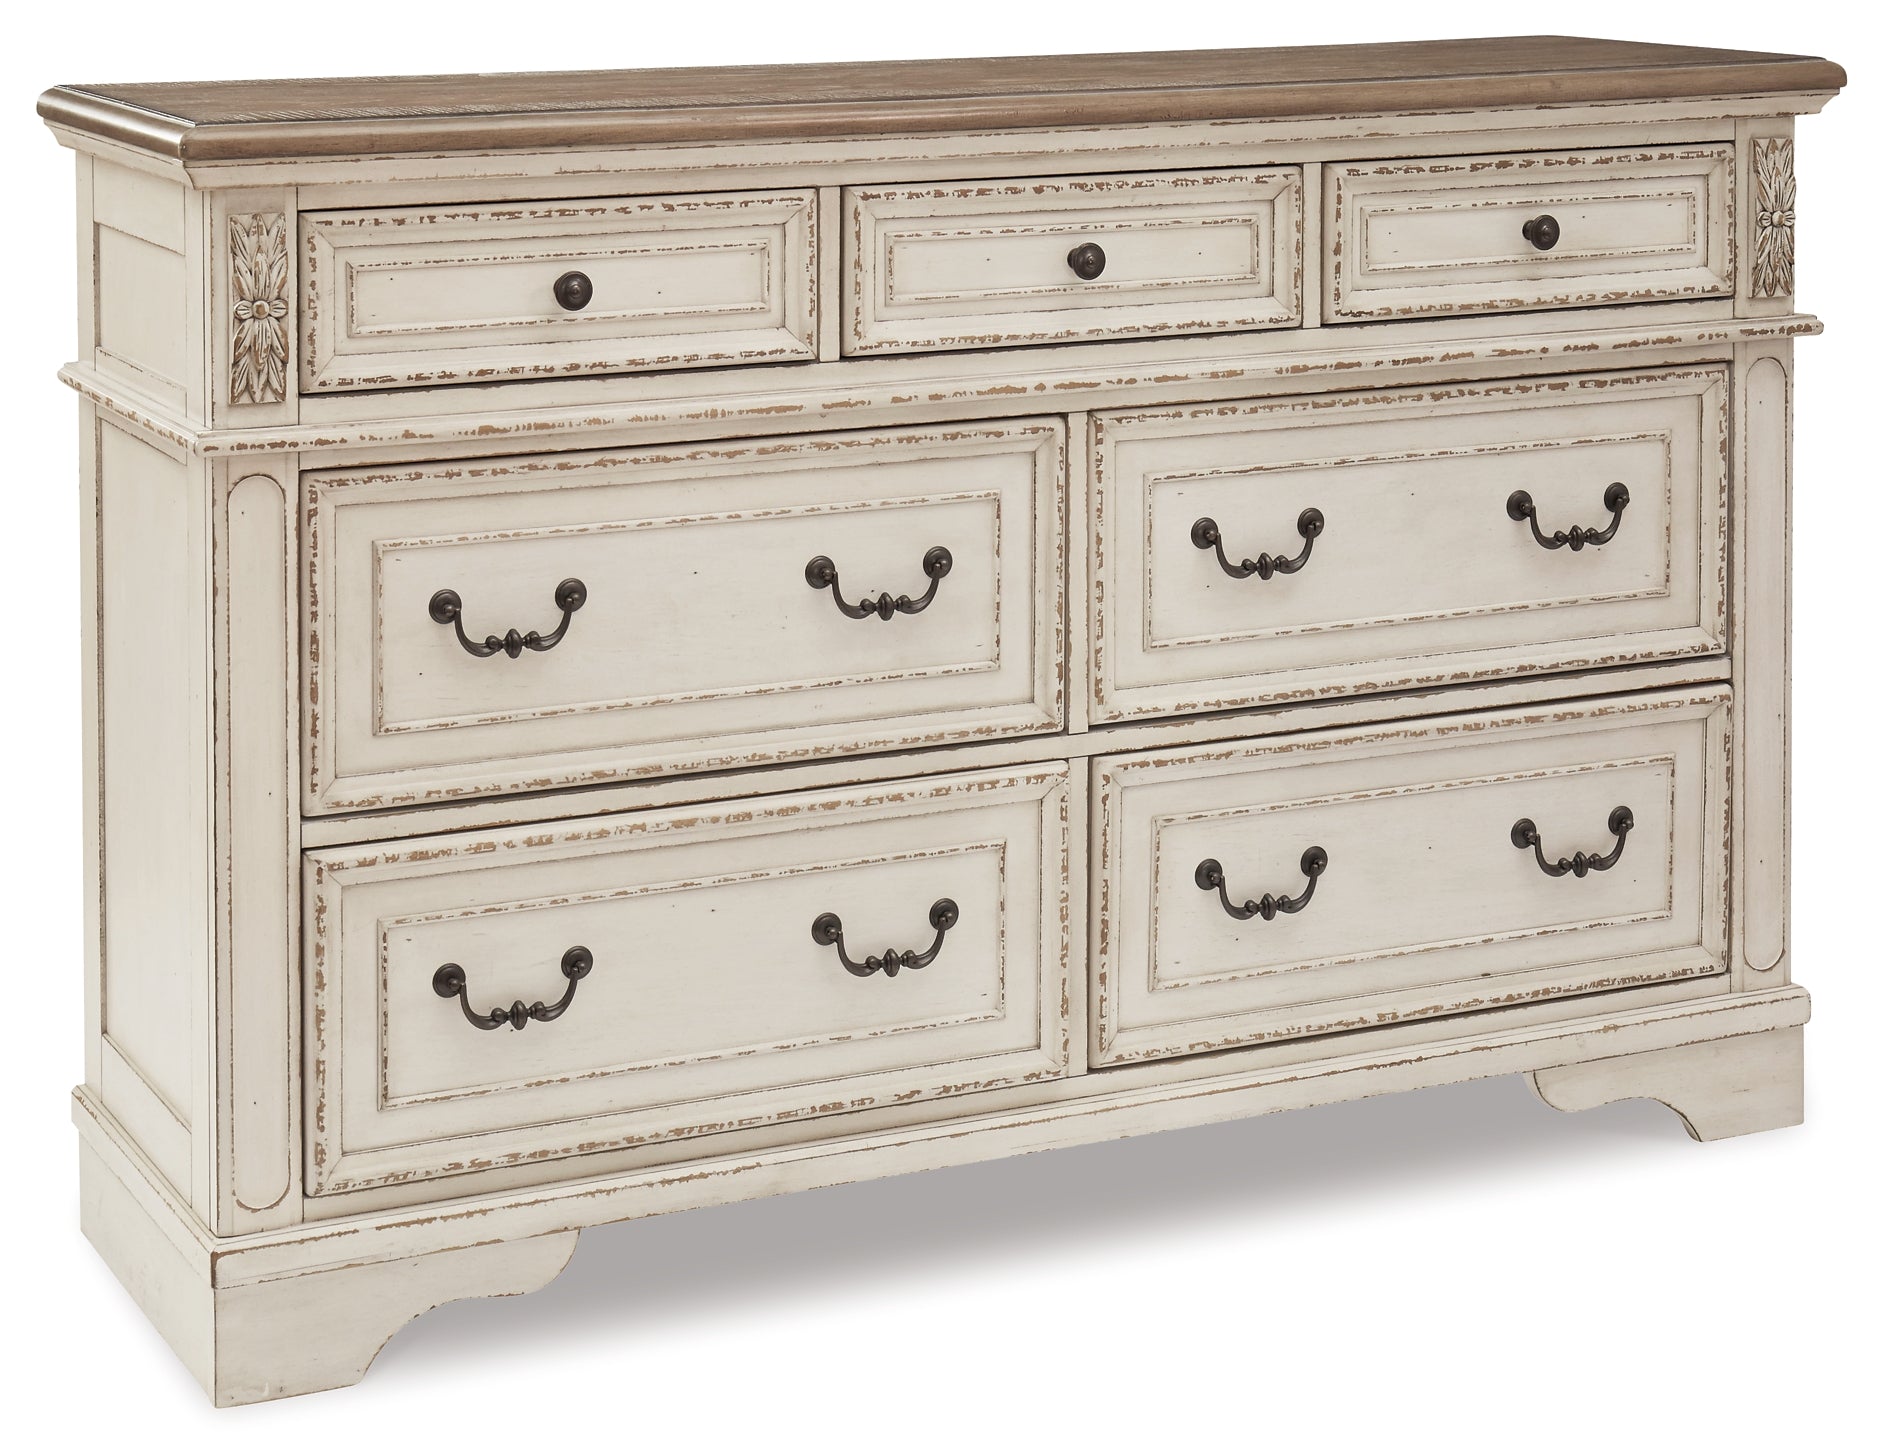 Realyn Twin Panel Bed with Dresser Smyrna Furniture Outlet